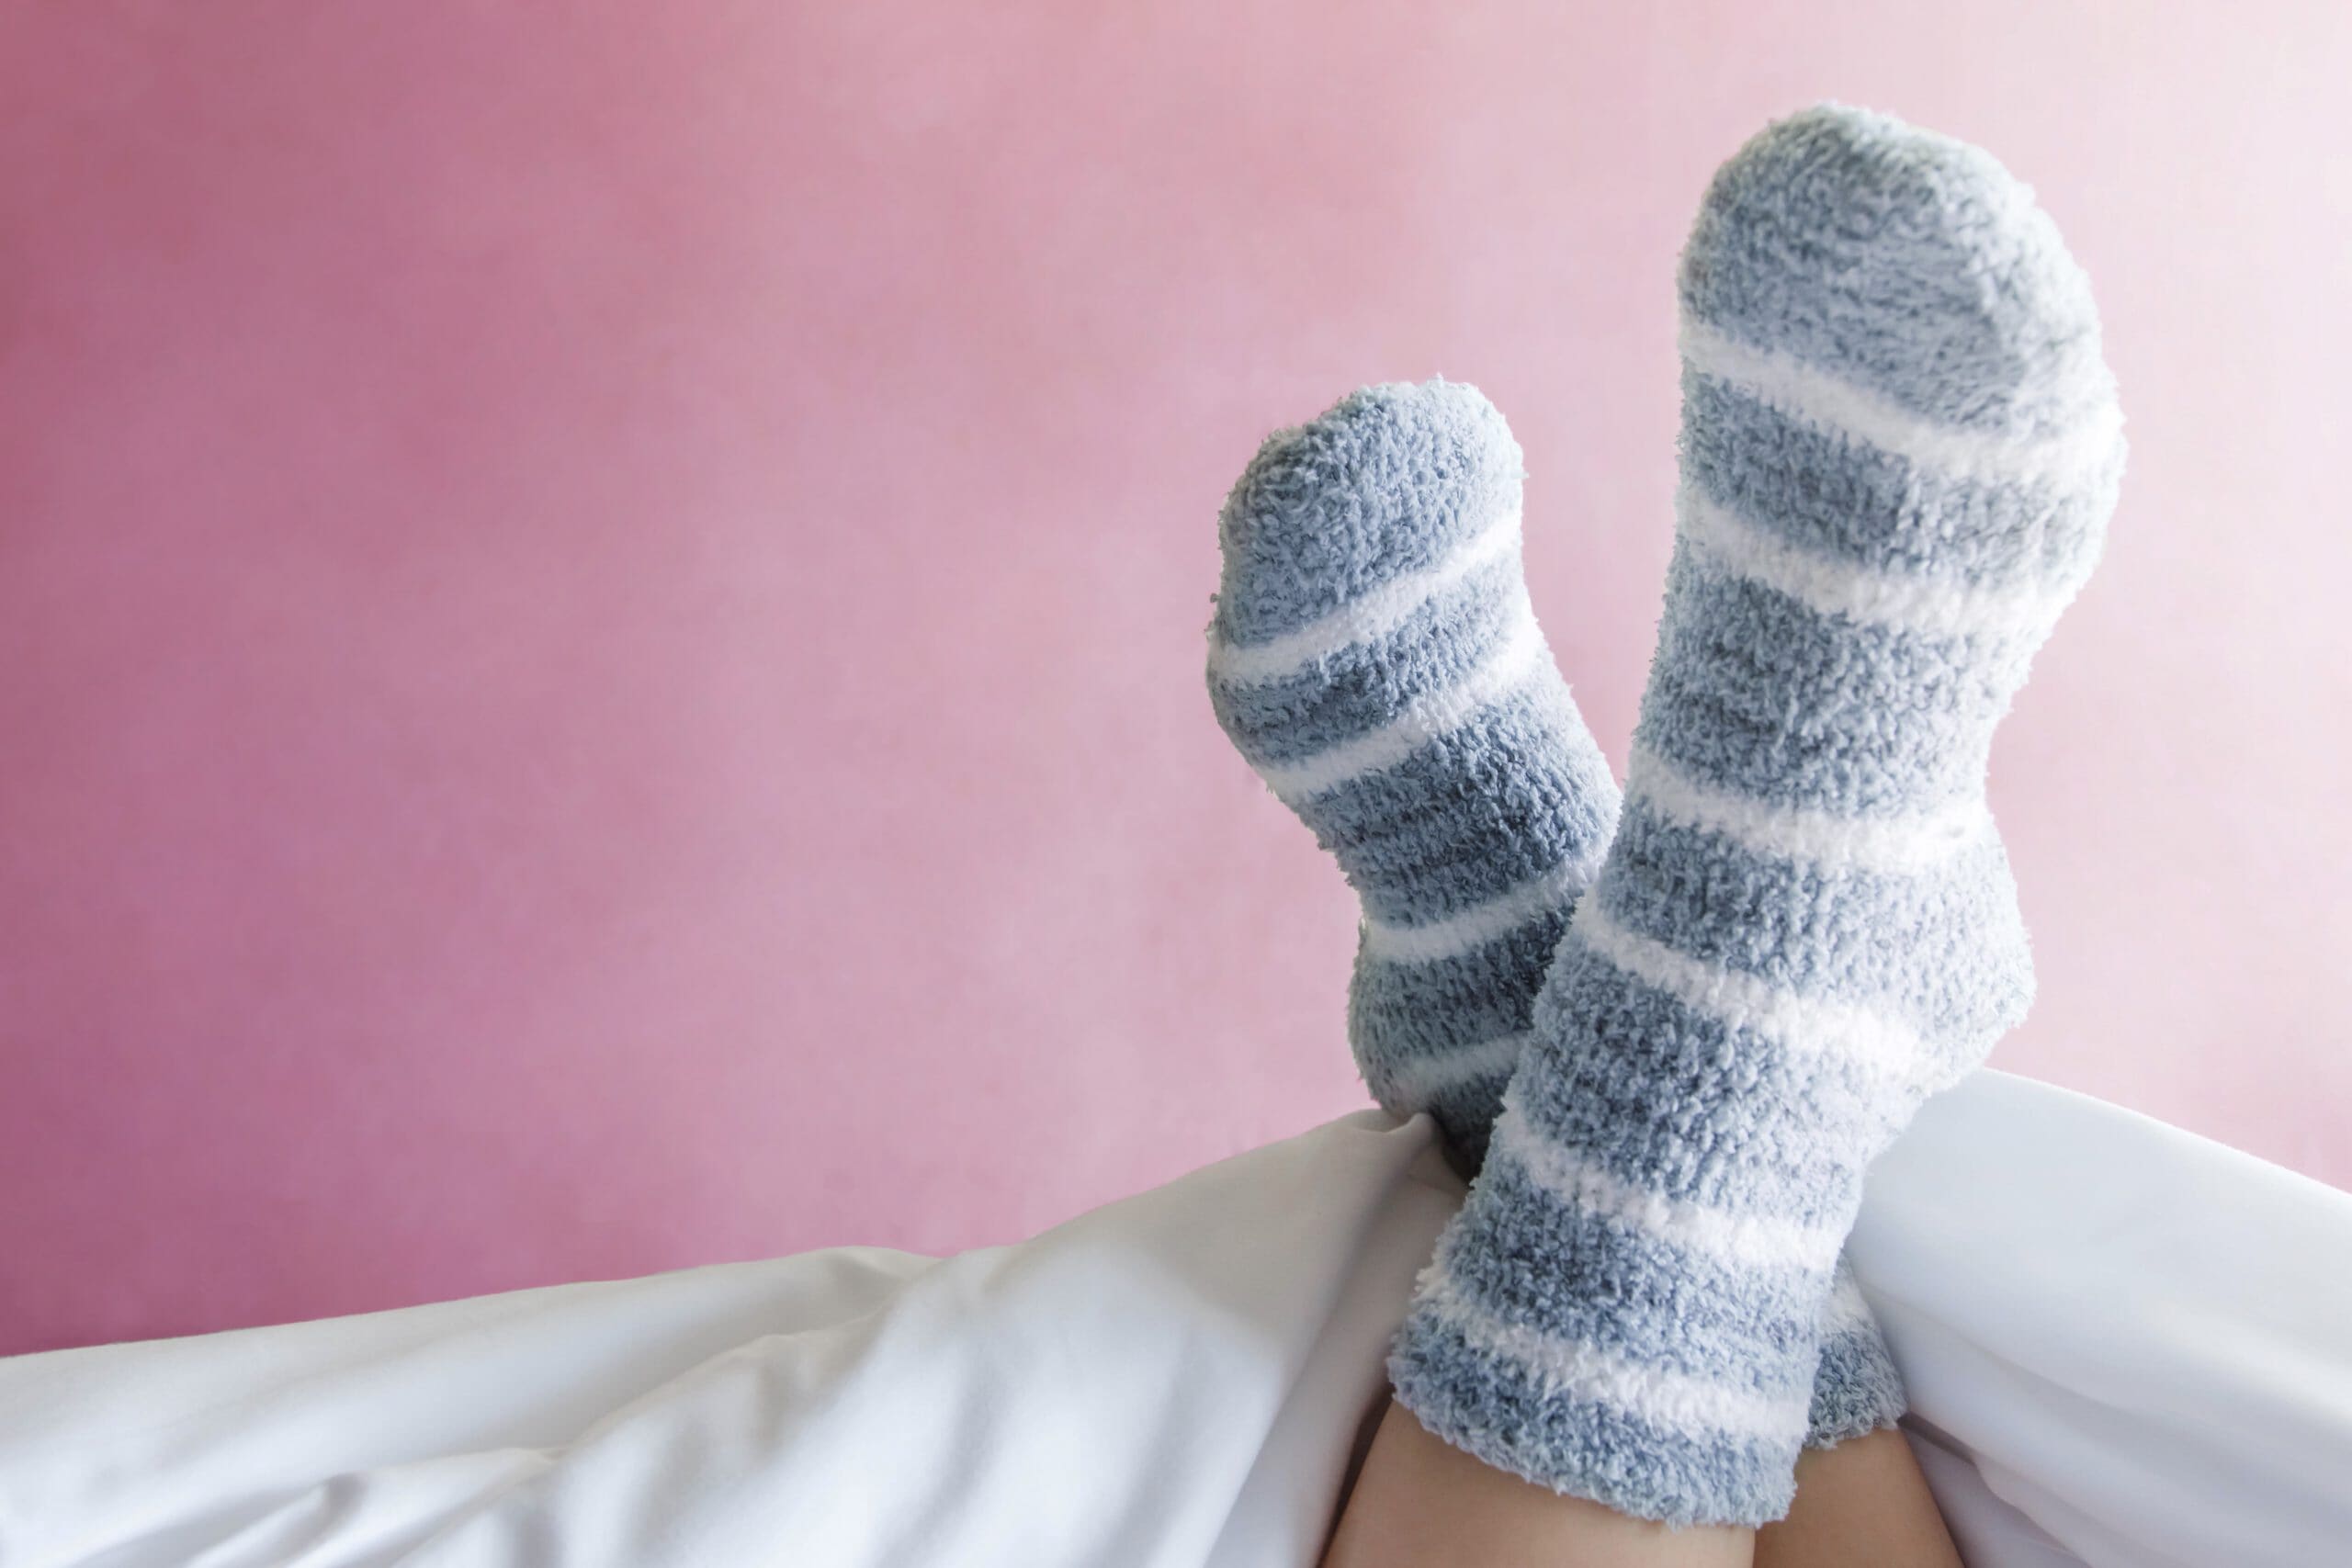 Does Wearing Socks to Bed Cool Down the Body for Sleep?